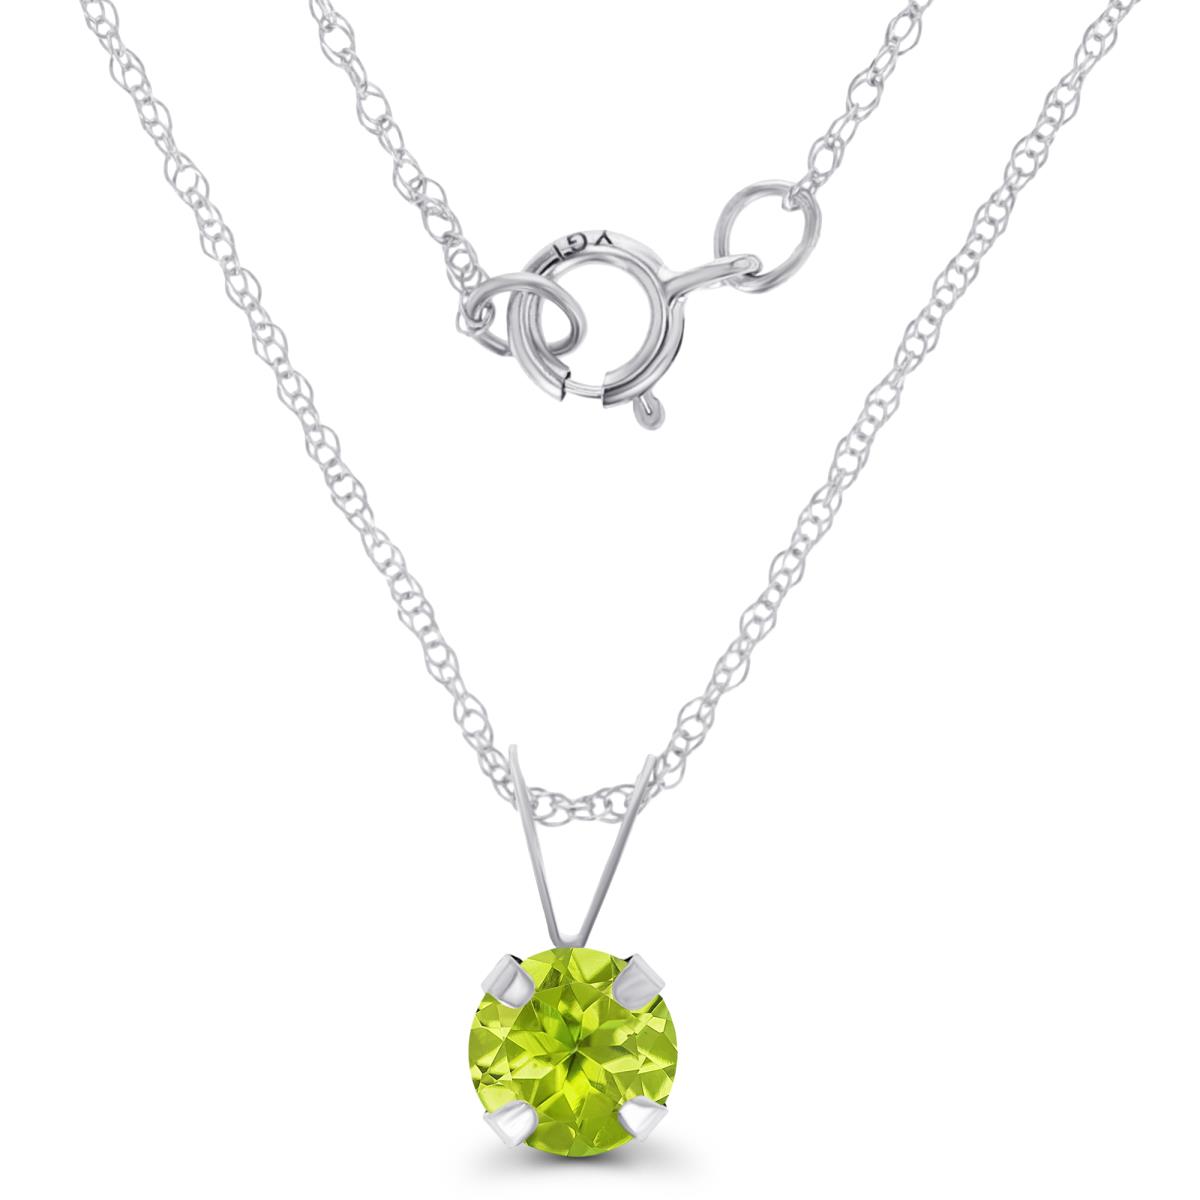 14K White Gold 5mm Round Peridot 18" Rope Chain Necklace